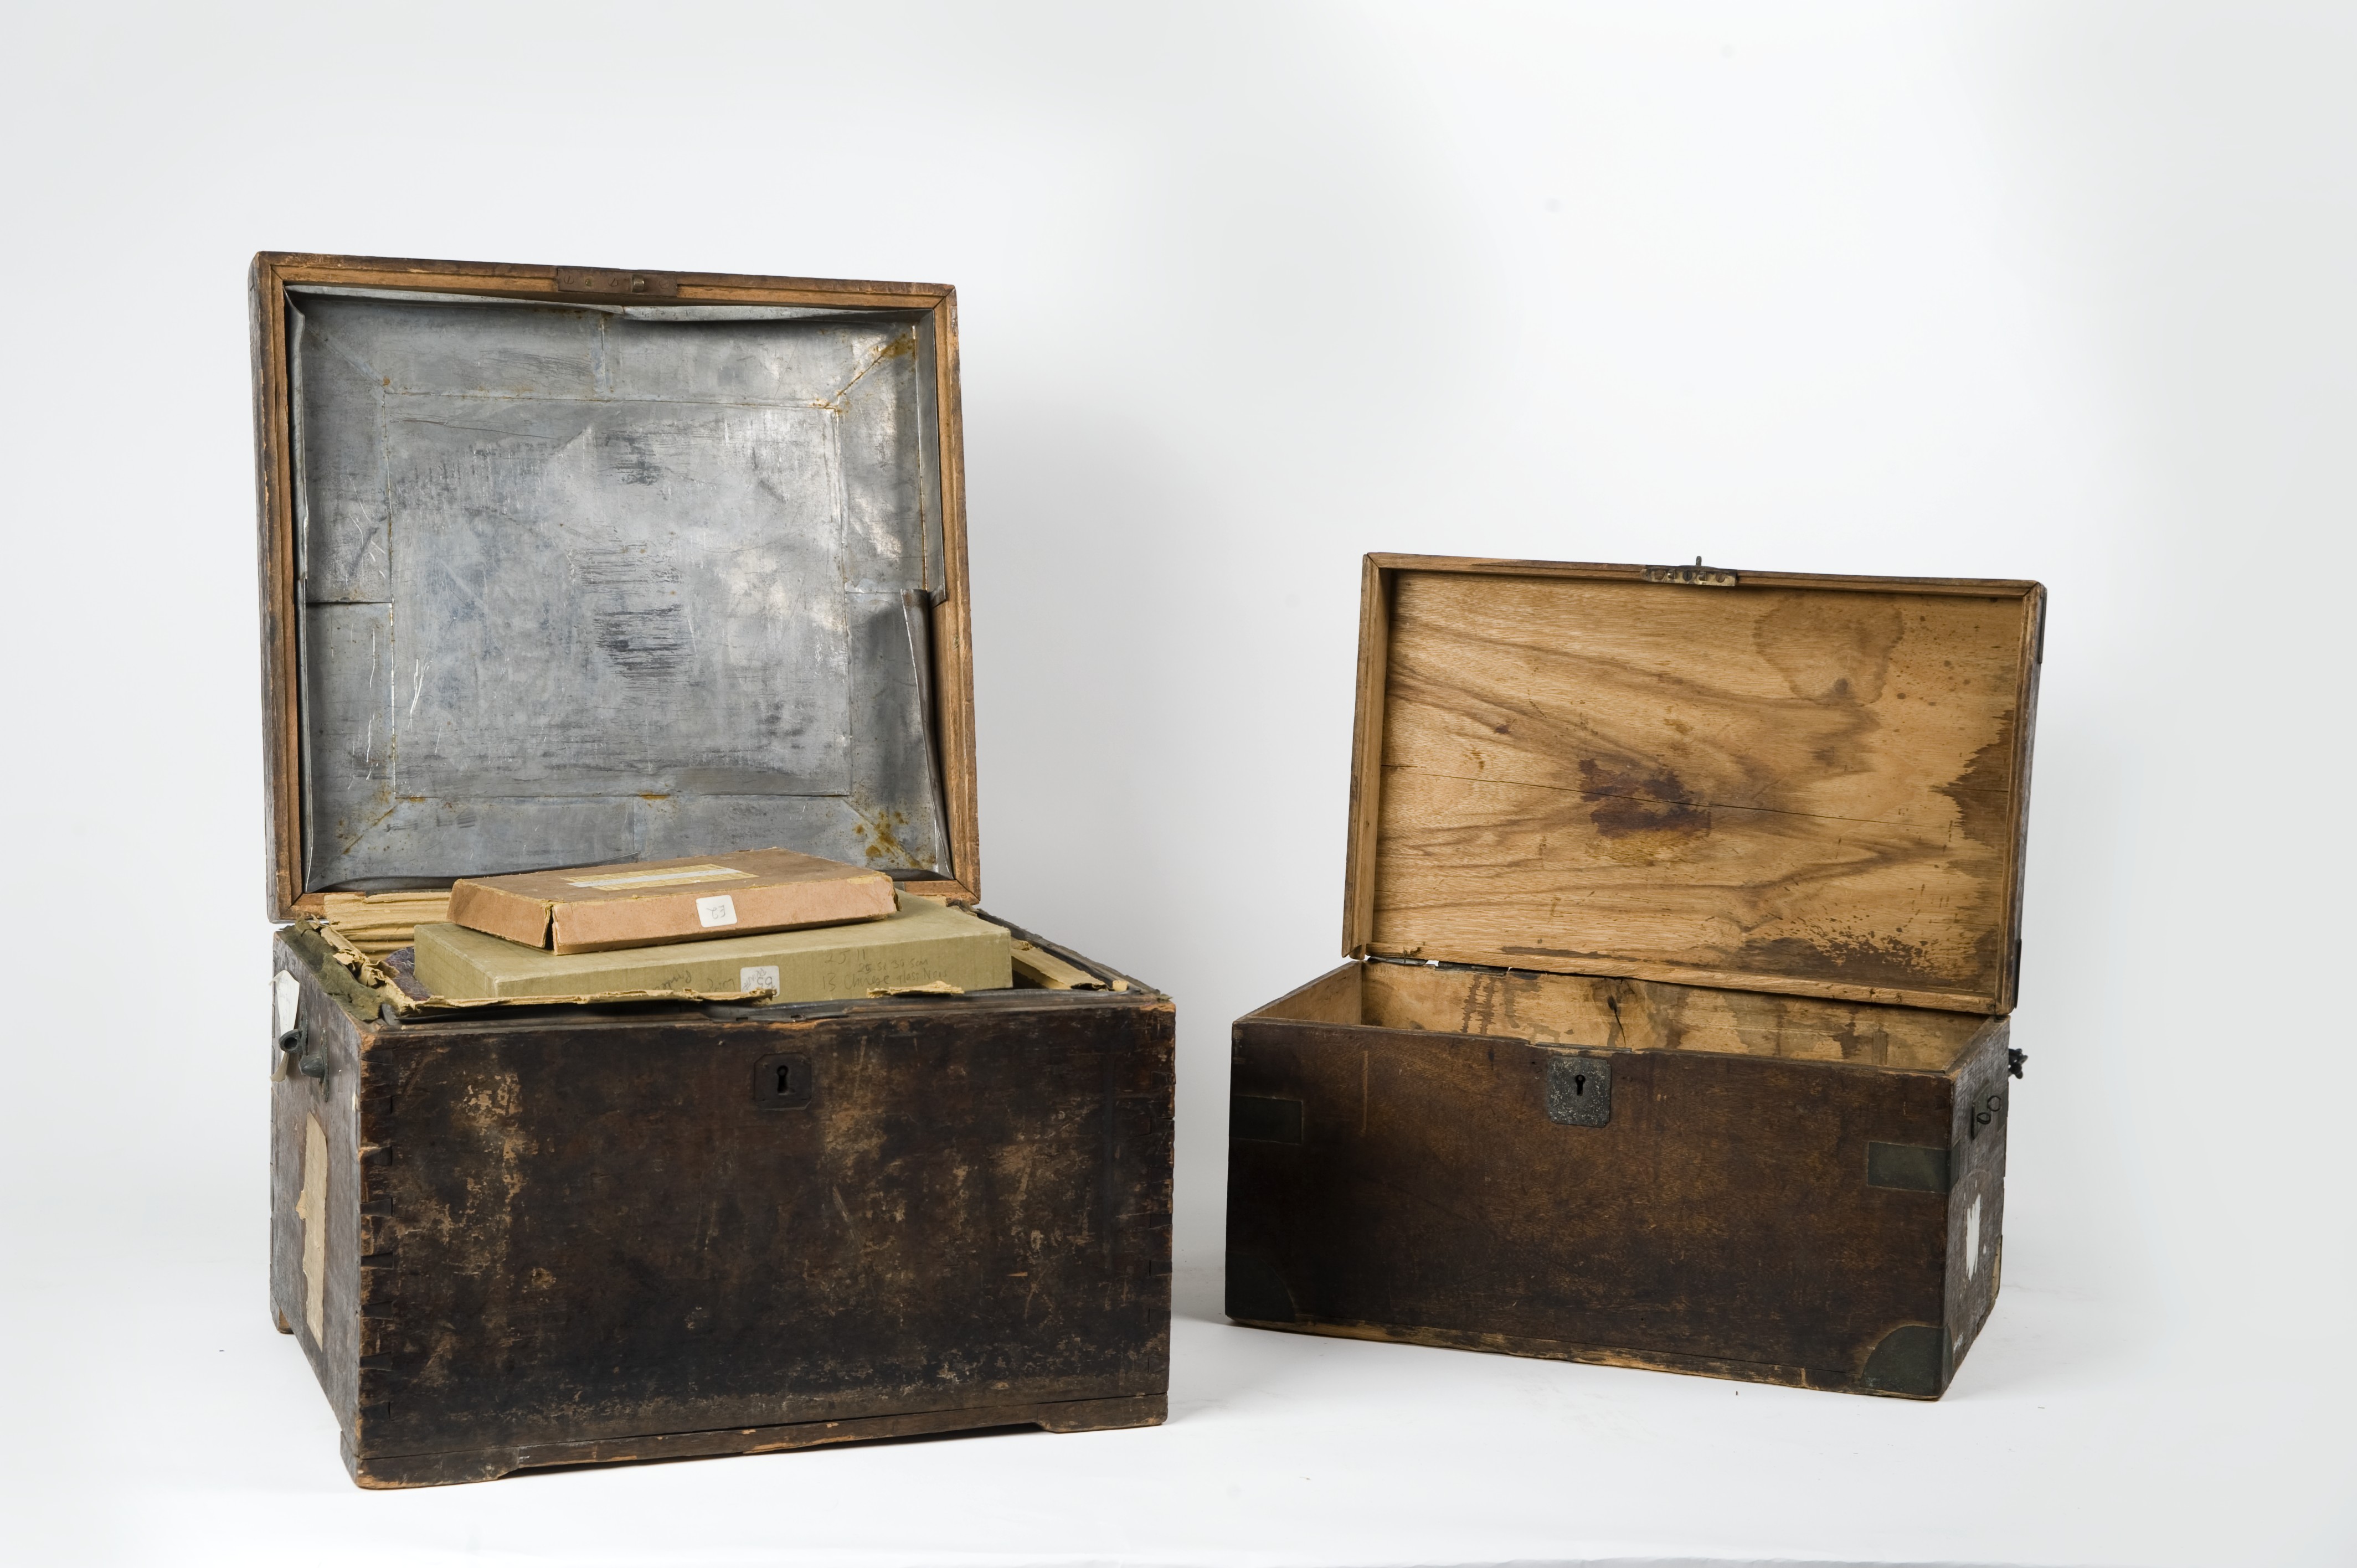 One of the chests which the photographer John Thomson Wellcome L0051607